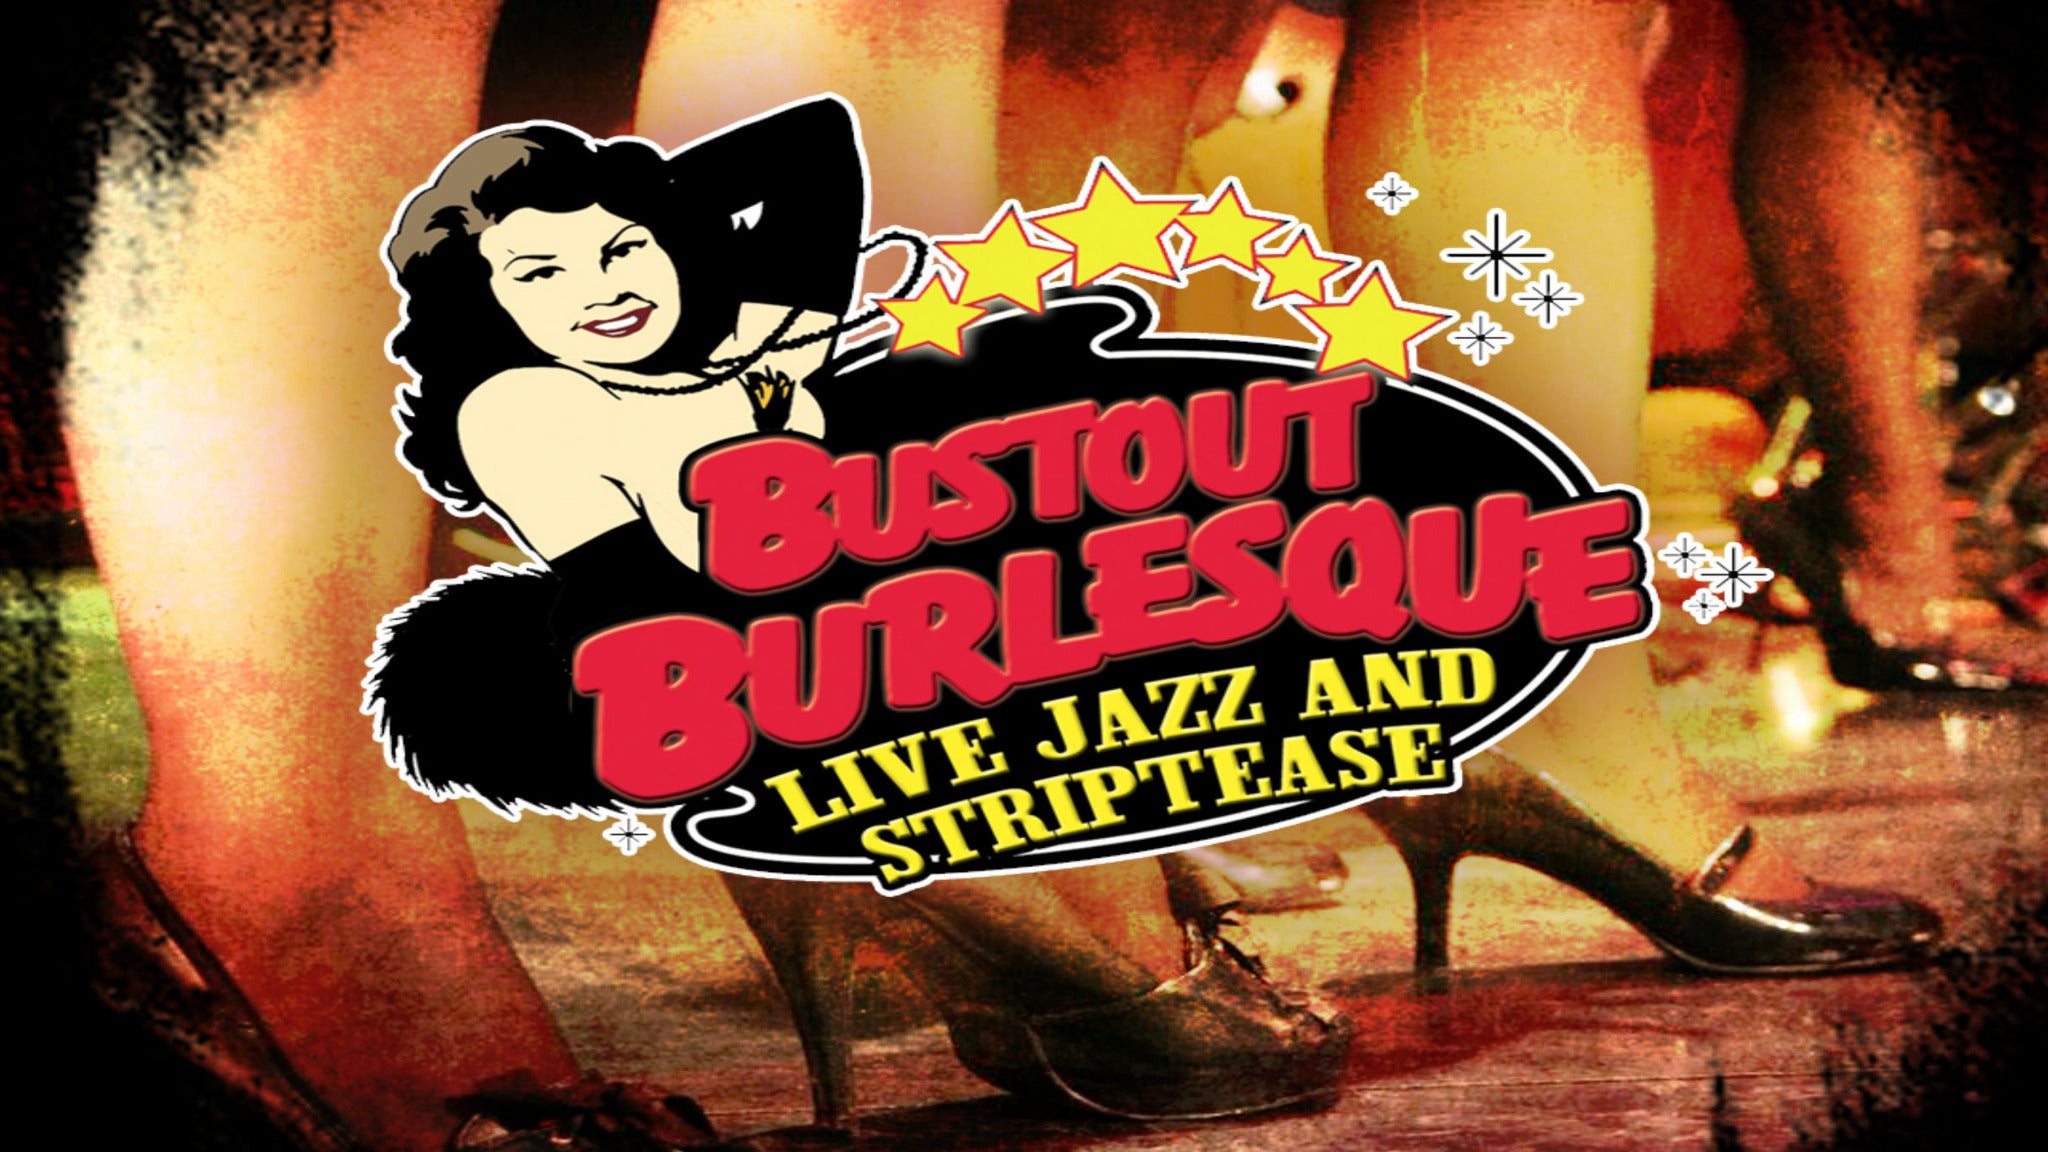 presale password for Bustout Burlesque tickets in New Orleans - LA (House of Blues New Orleans )